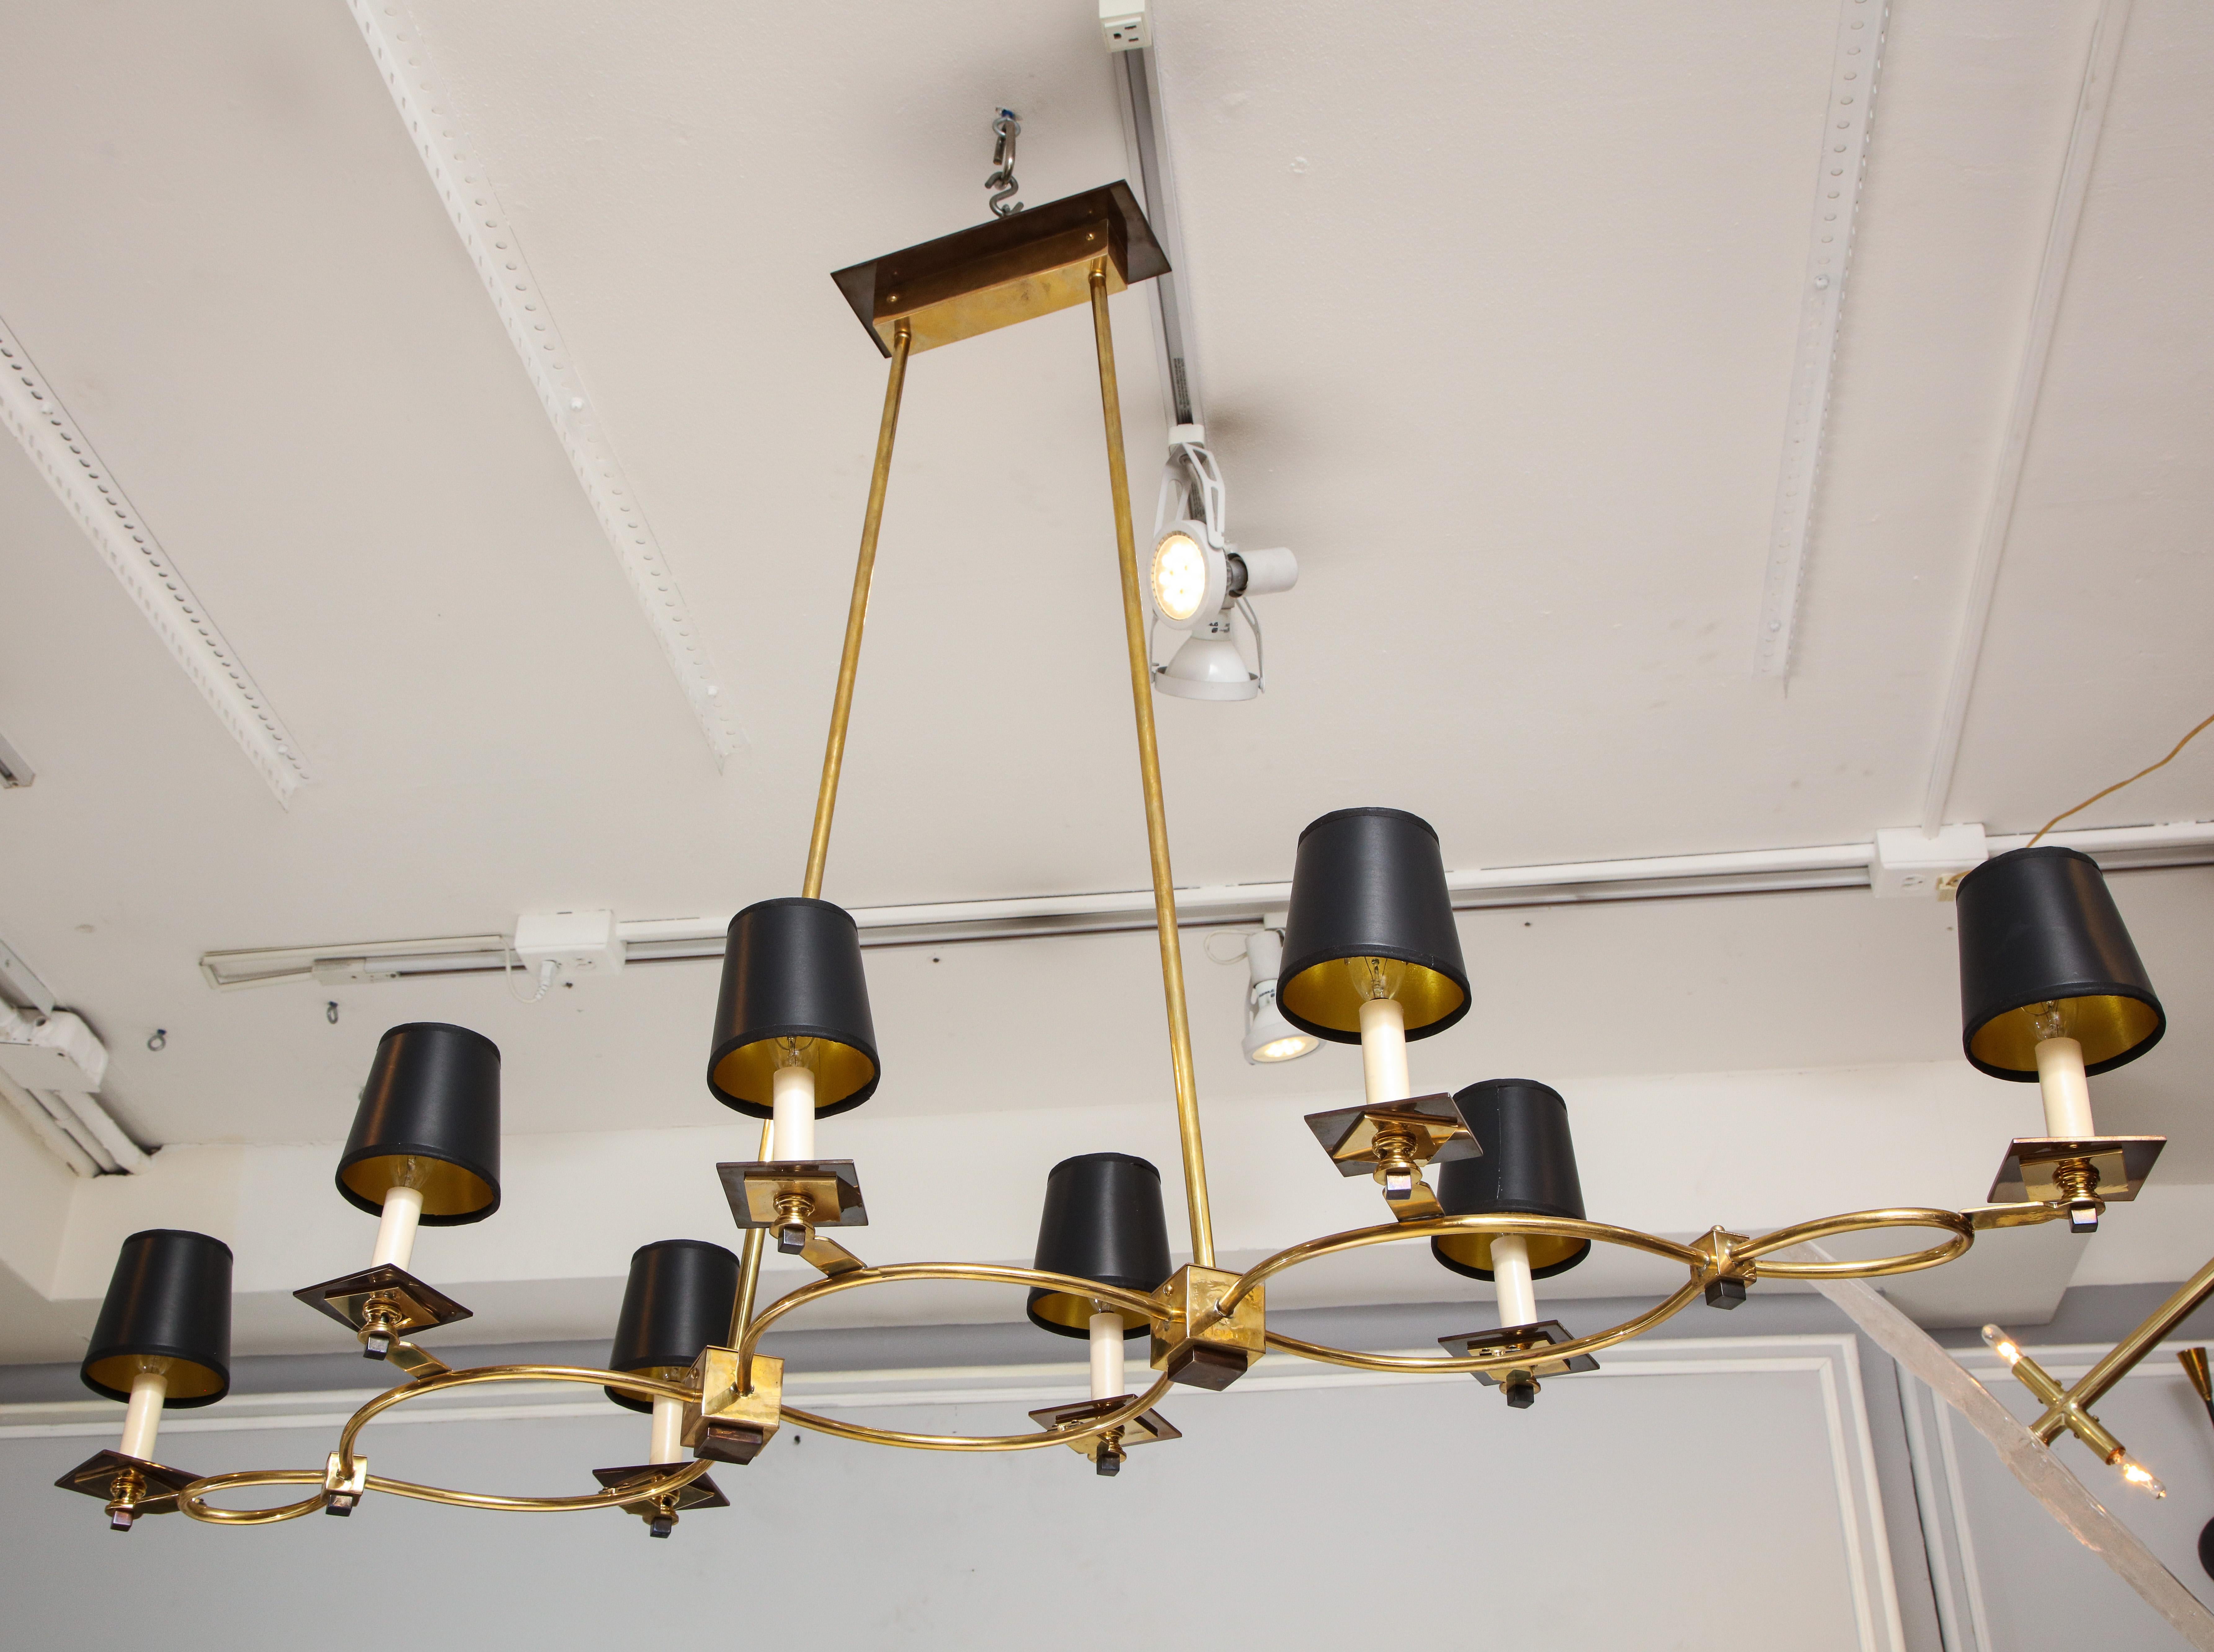 Midcentury style custom brass and bronze eight-arm fixture.
This fixture is customizable to your specifications with a lead time of 8-10 weeks.